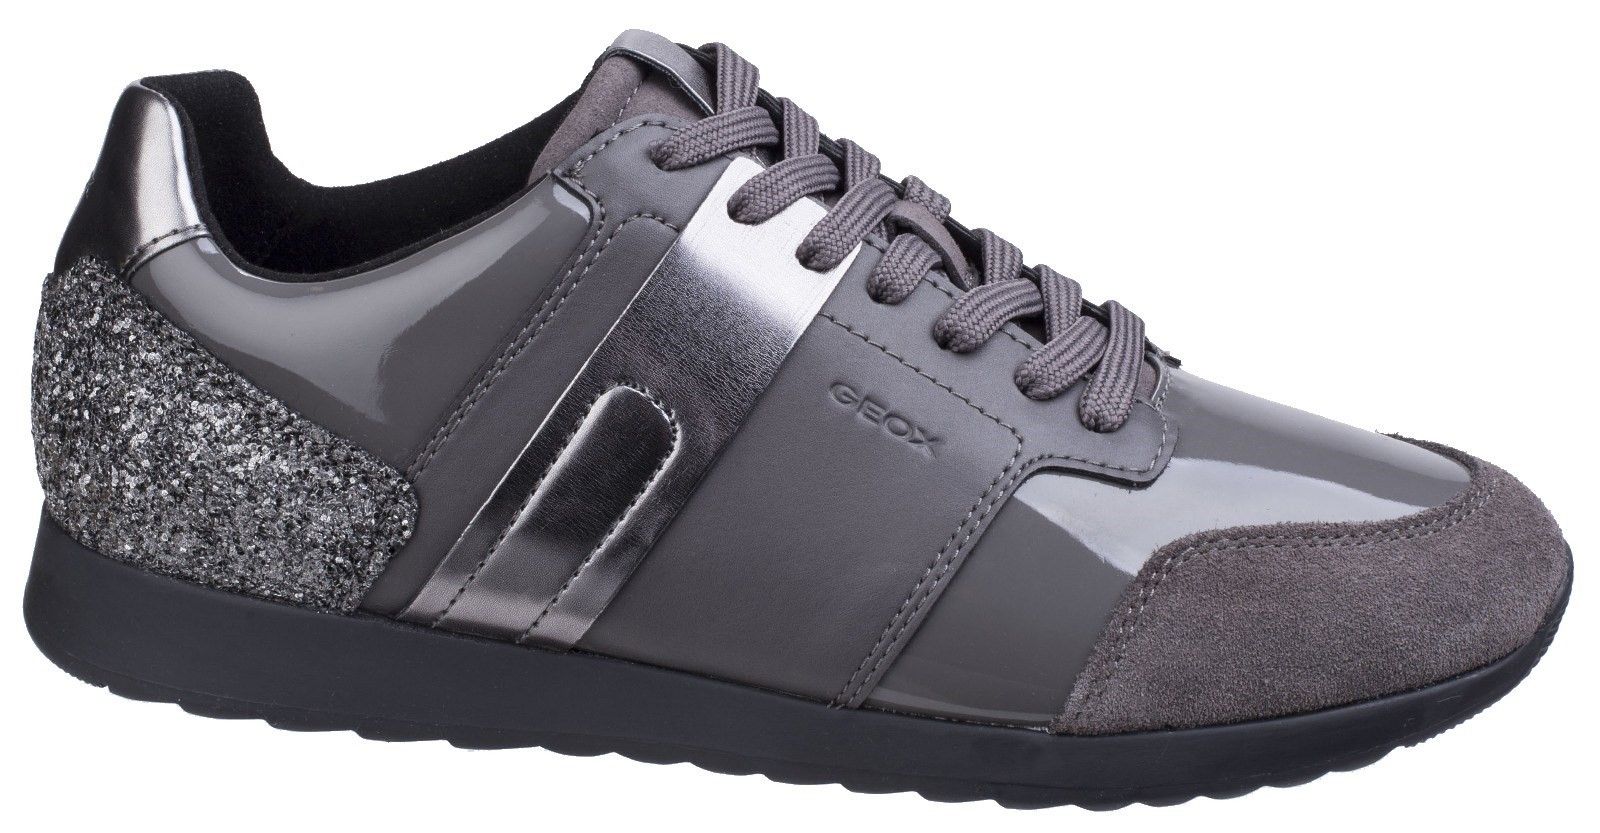 Casual dressy-style women's sneakers with an upper combining different materials. Geox patented perforated sole for breathability and comfort. Rubber sole ensuring grip and durability.Adjustable. 
Sports Design. 
Anti-Slip Outsole.